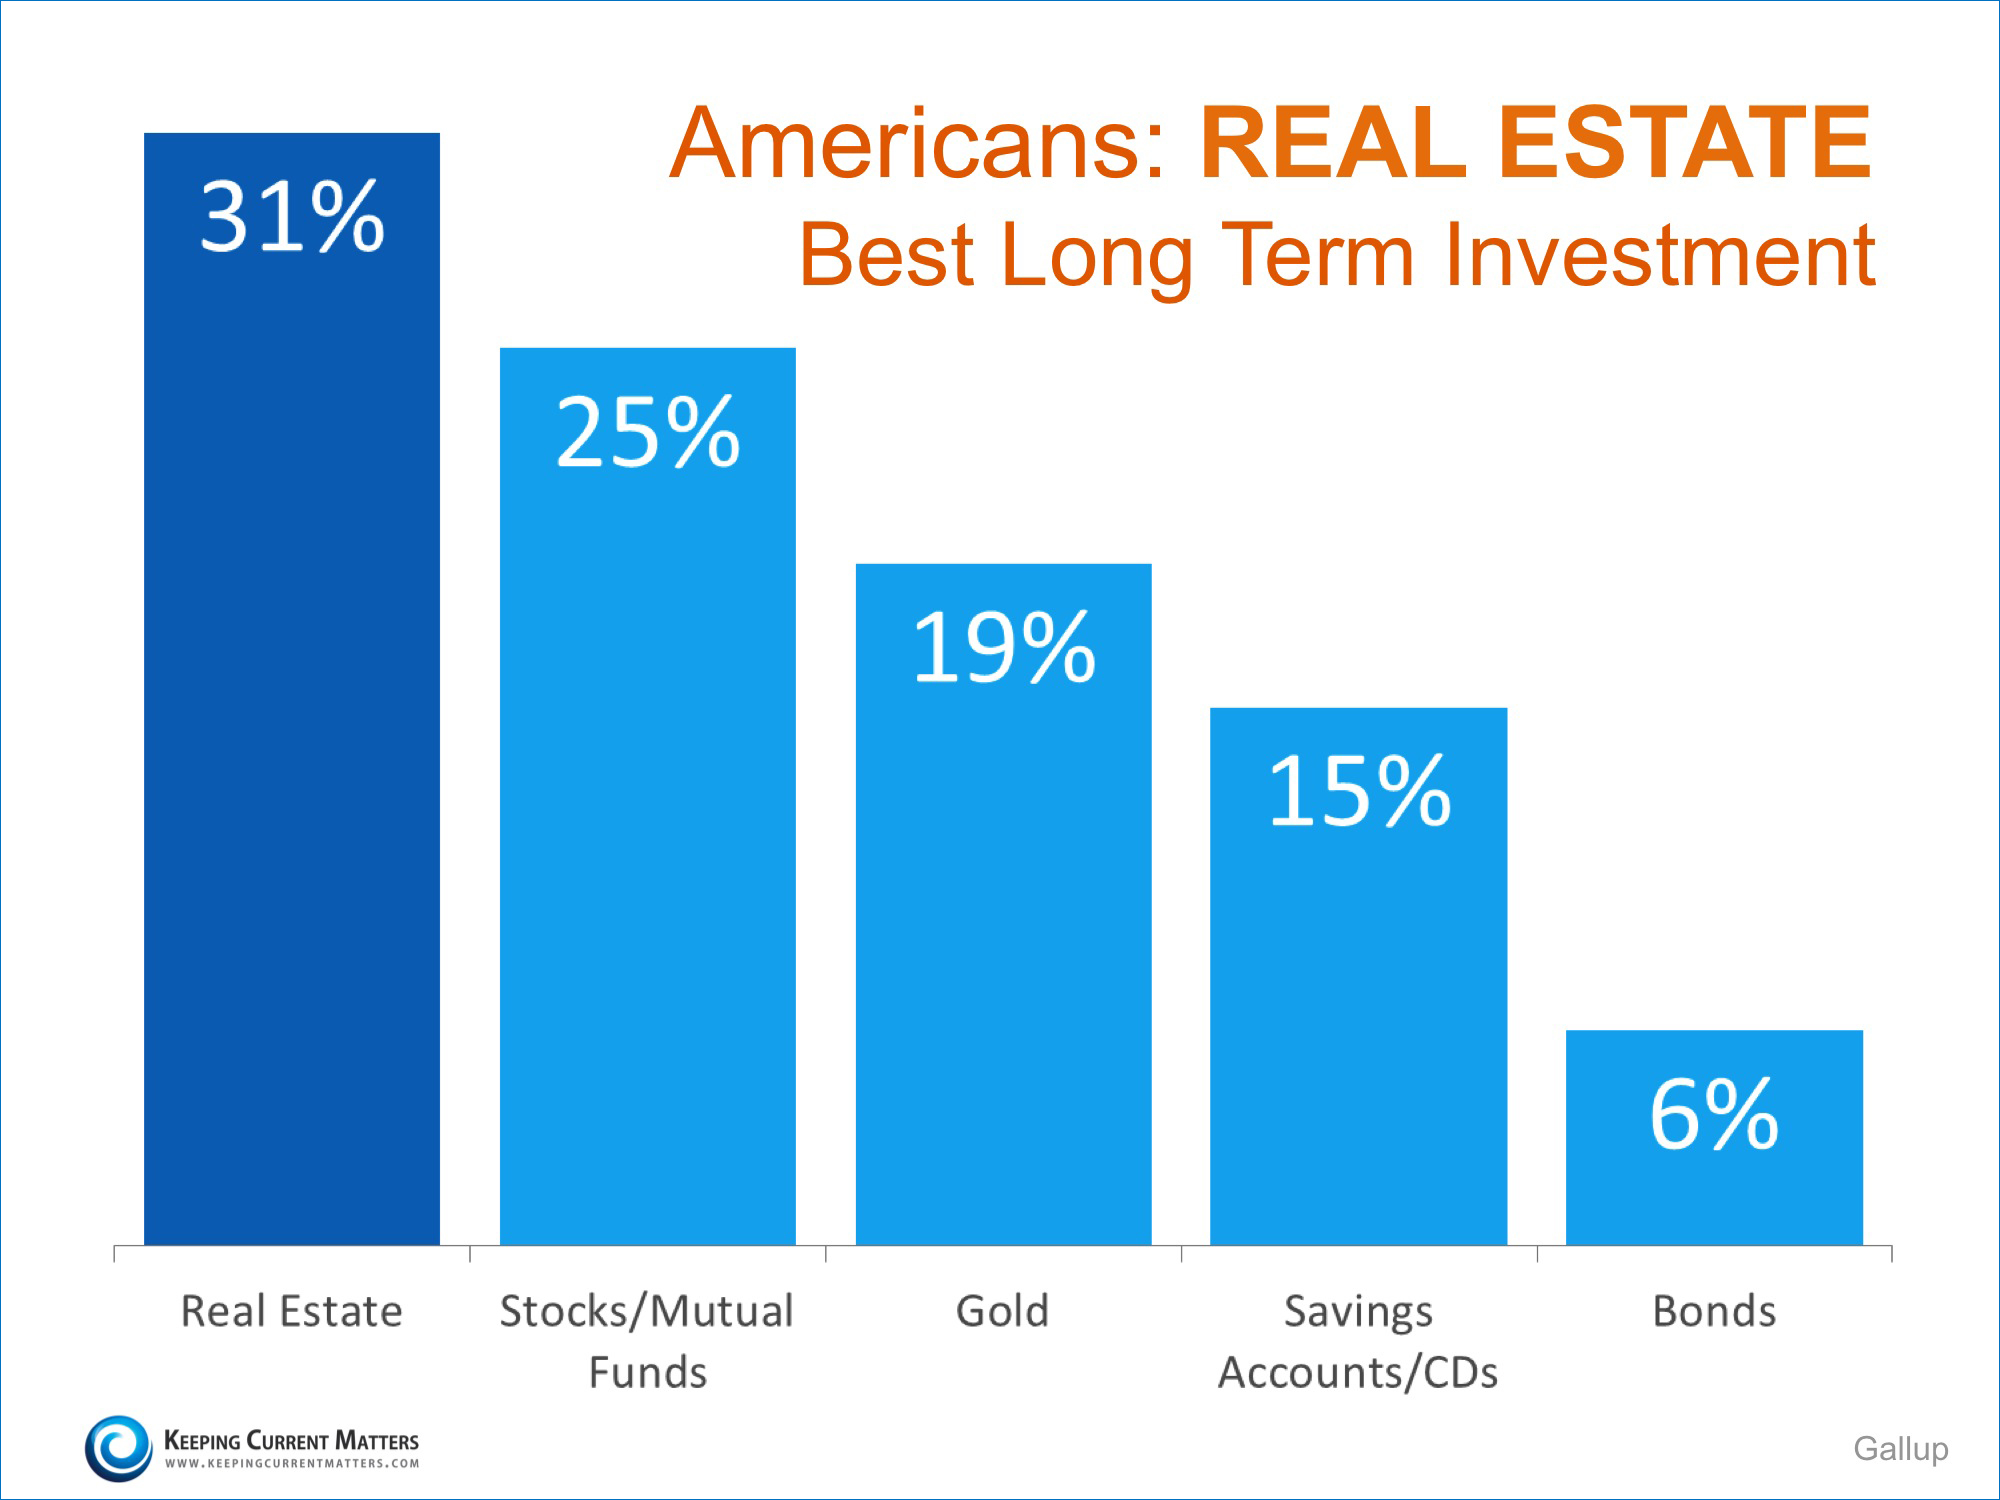 Americans: Real Estate is Best Long Term Investment | Keeping Current Matters